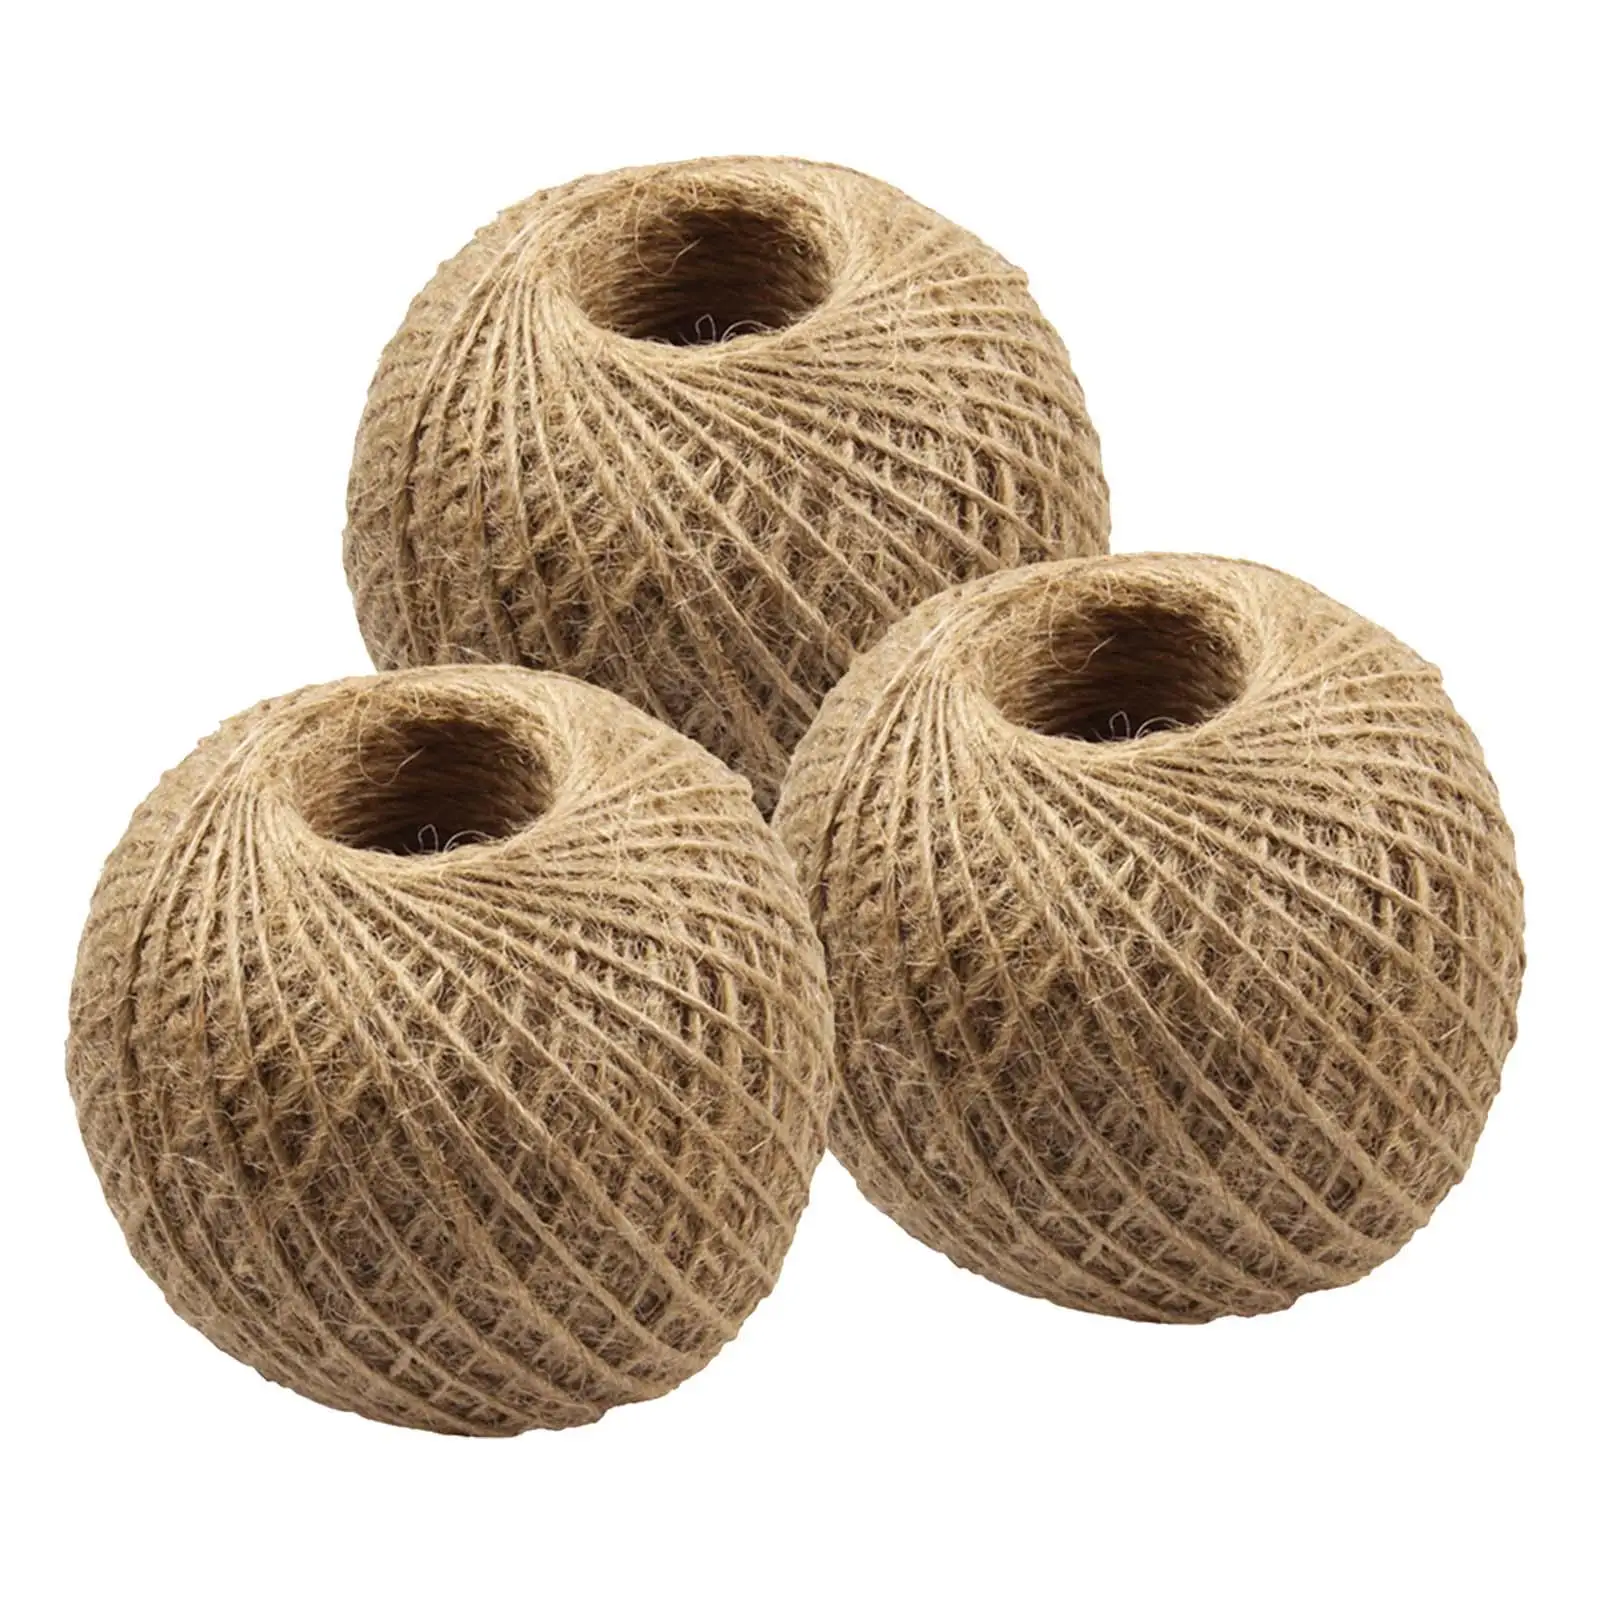 

3Pcs 2mm Hemp Twine String Jute Twine Rope for Gardening Applications Butcher Twine Gift Packing Industrial Packing Materials